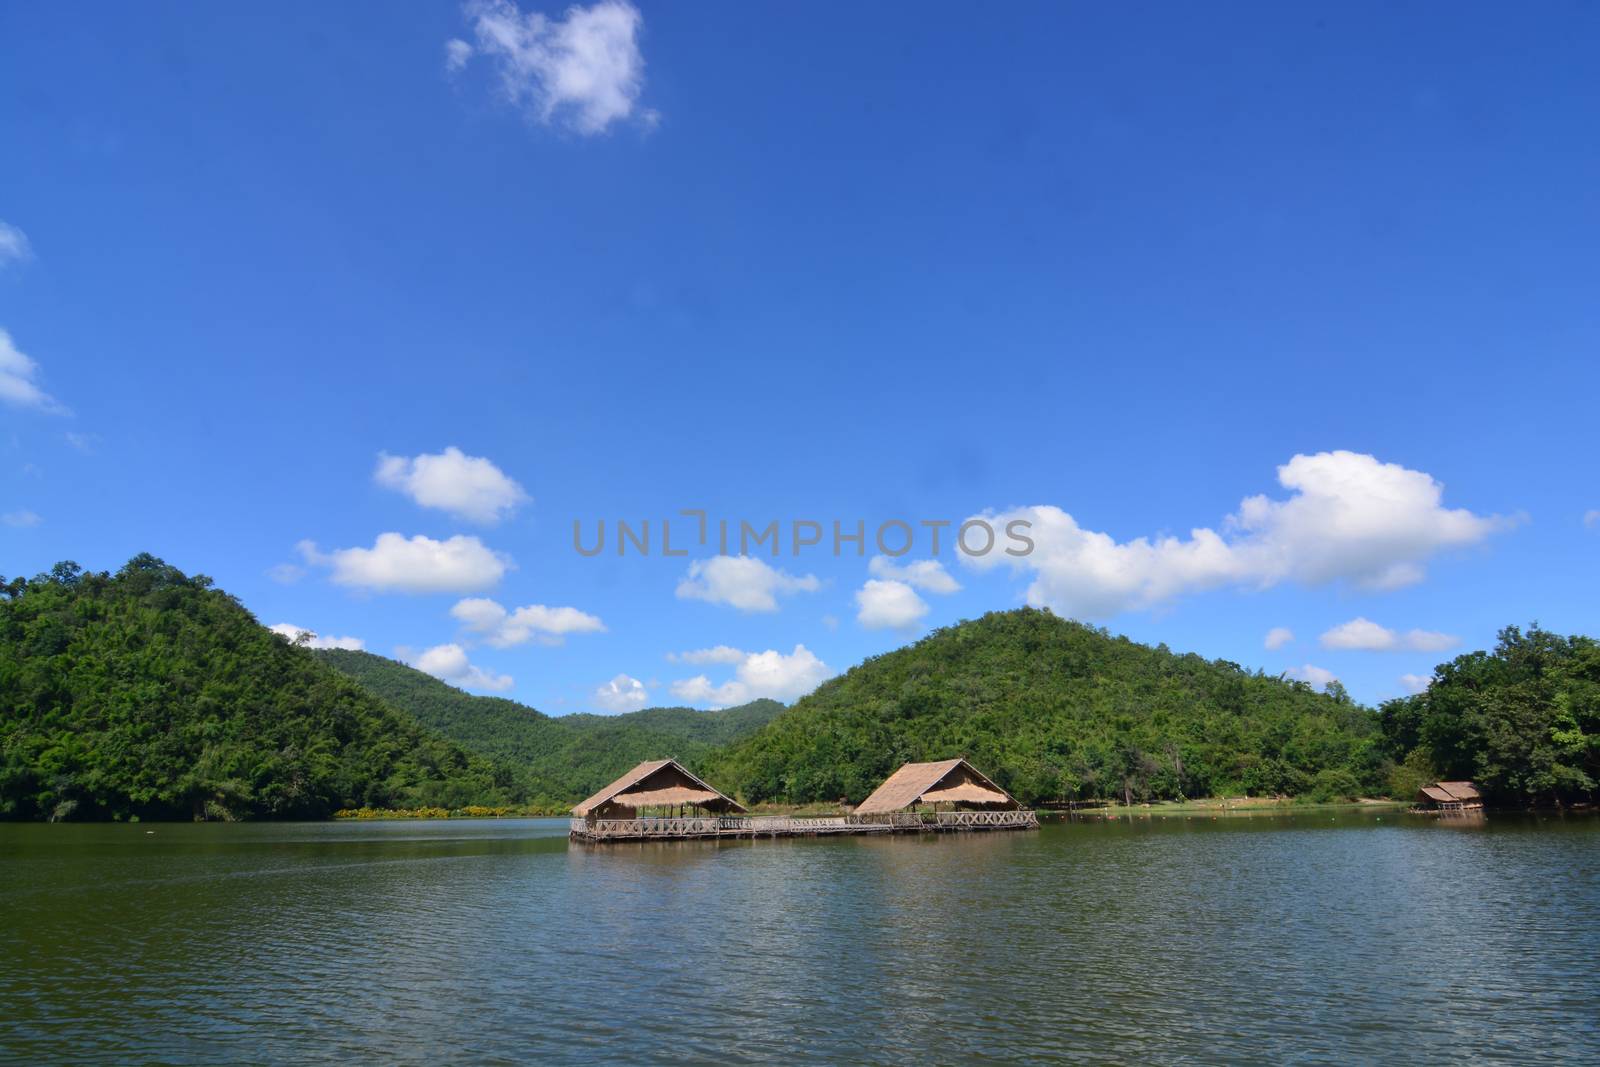 Ang Kep Nam Khao Wong have old traditional house in the lake of khao wong, Suphan Buri Province,Thailand by ideation90